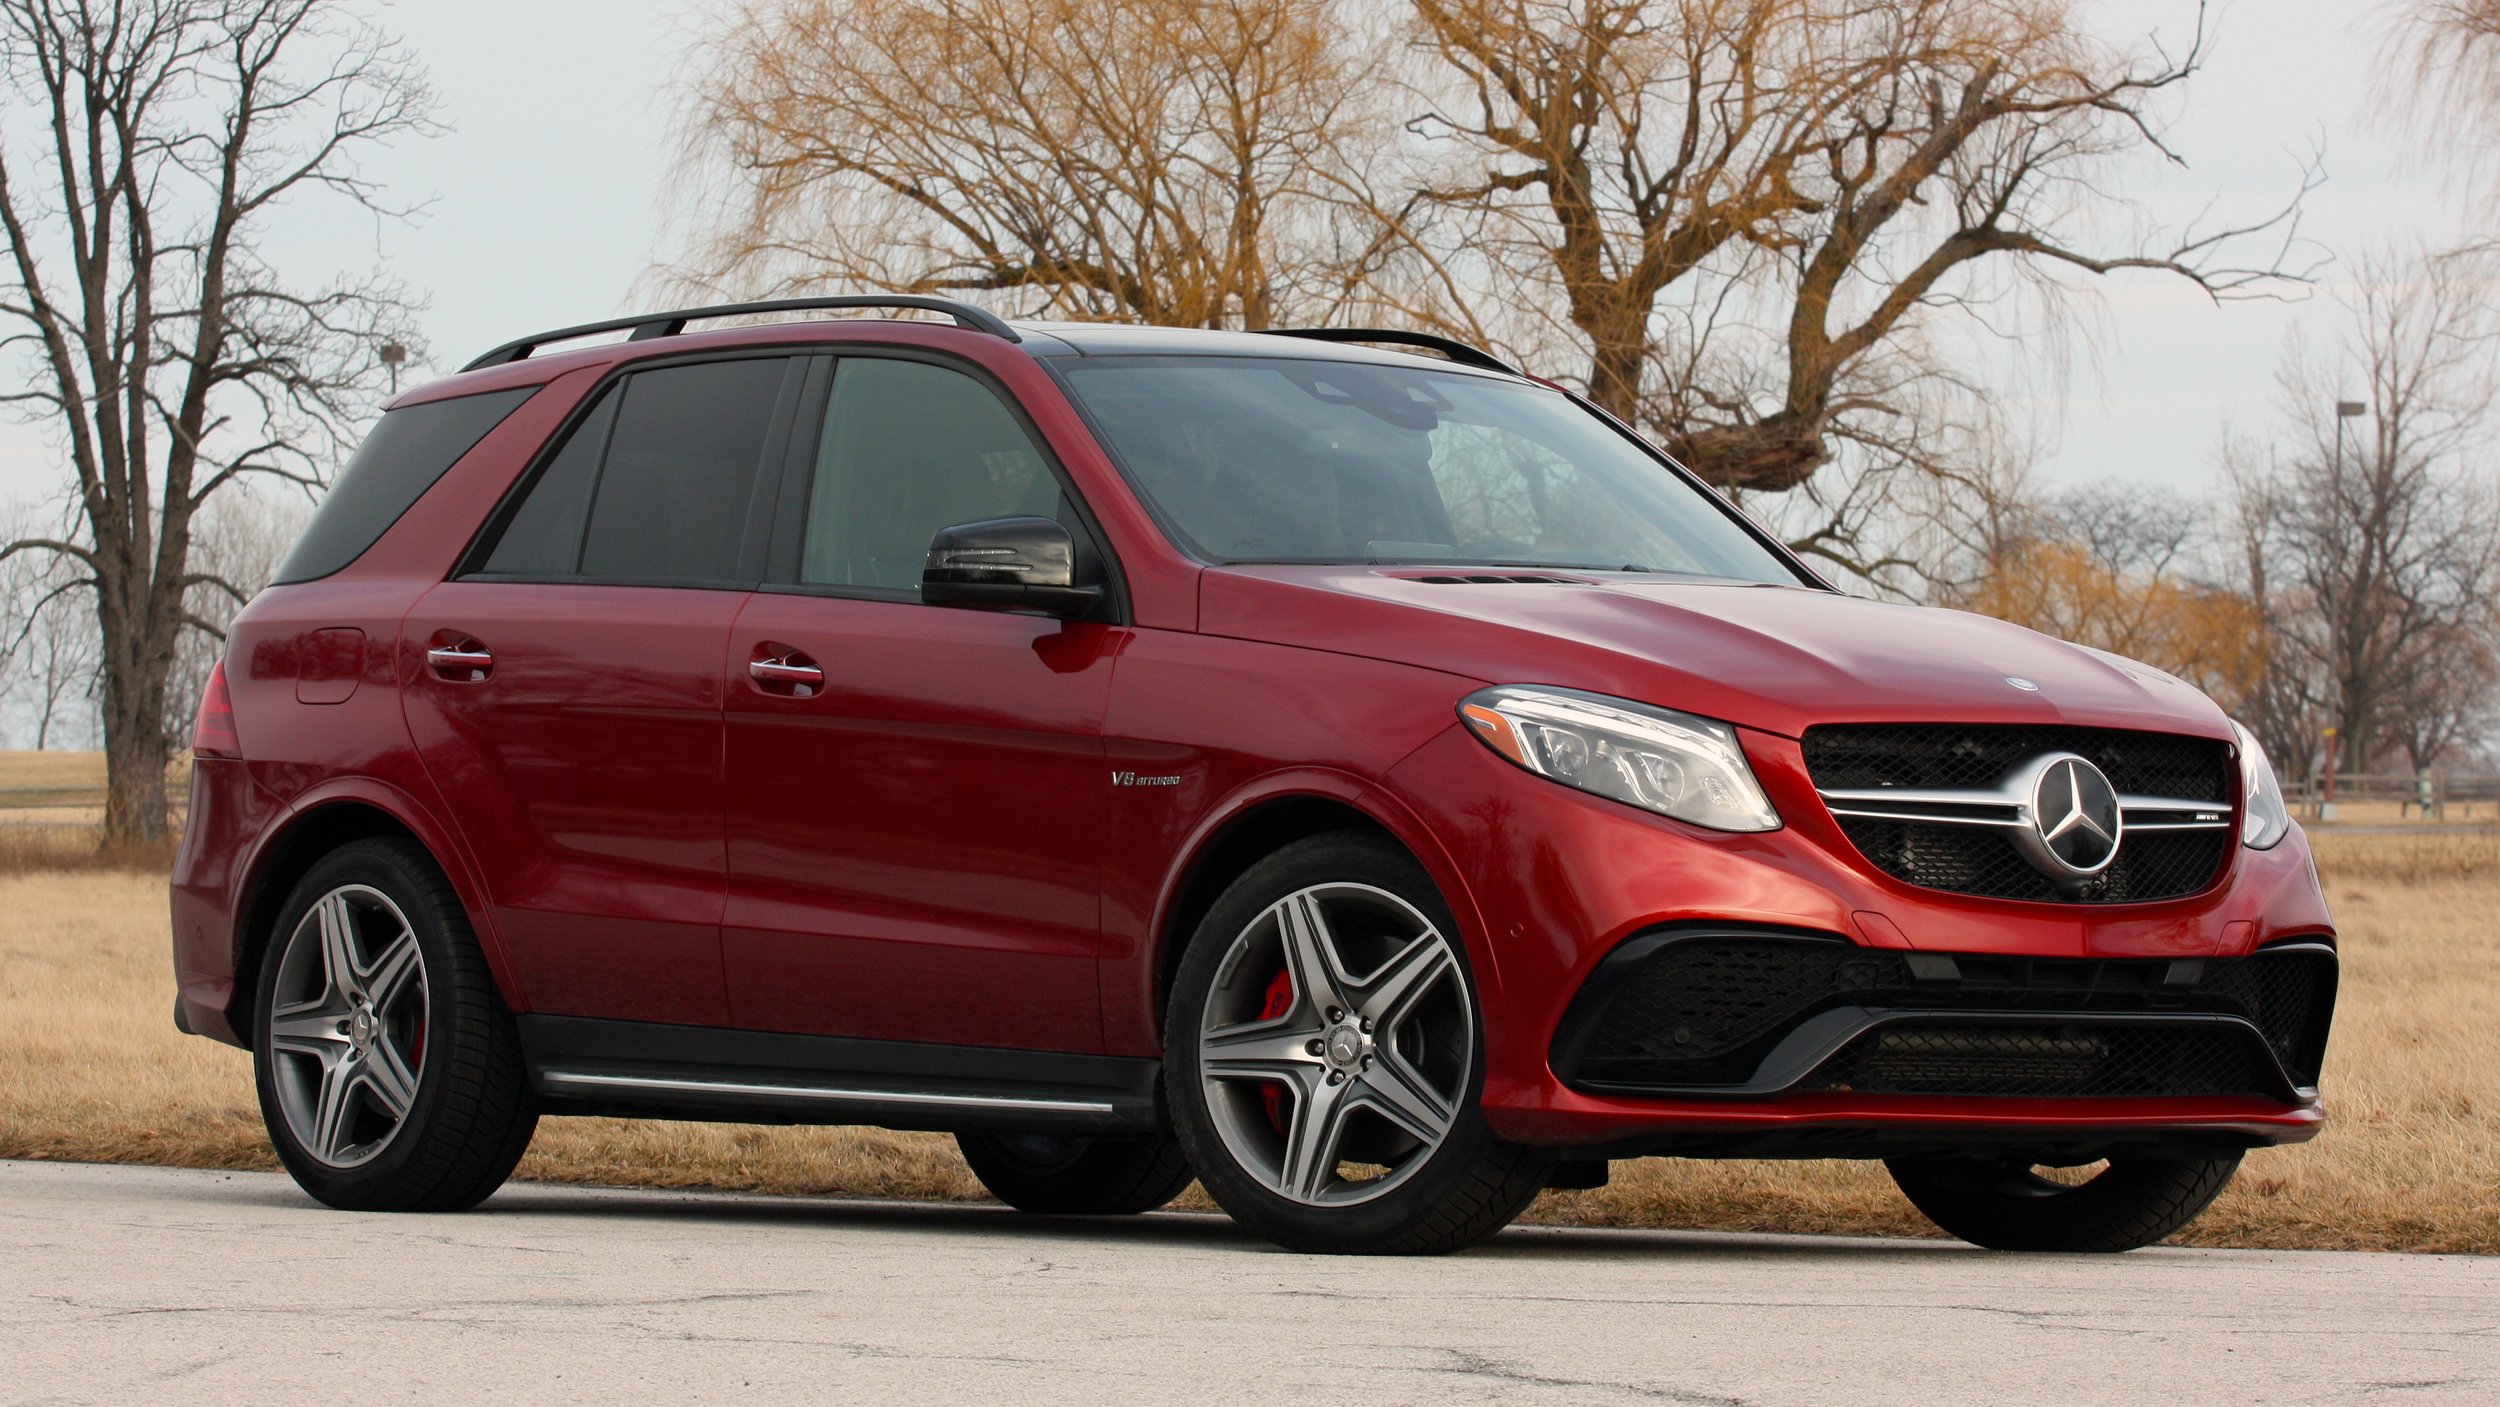 2016, Mercedes, Amg, Gle63, S, Cars, Suv, Red Wallpaper